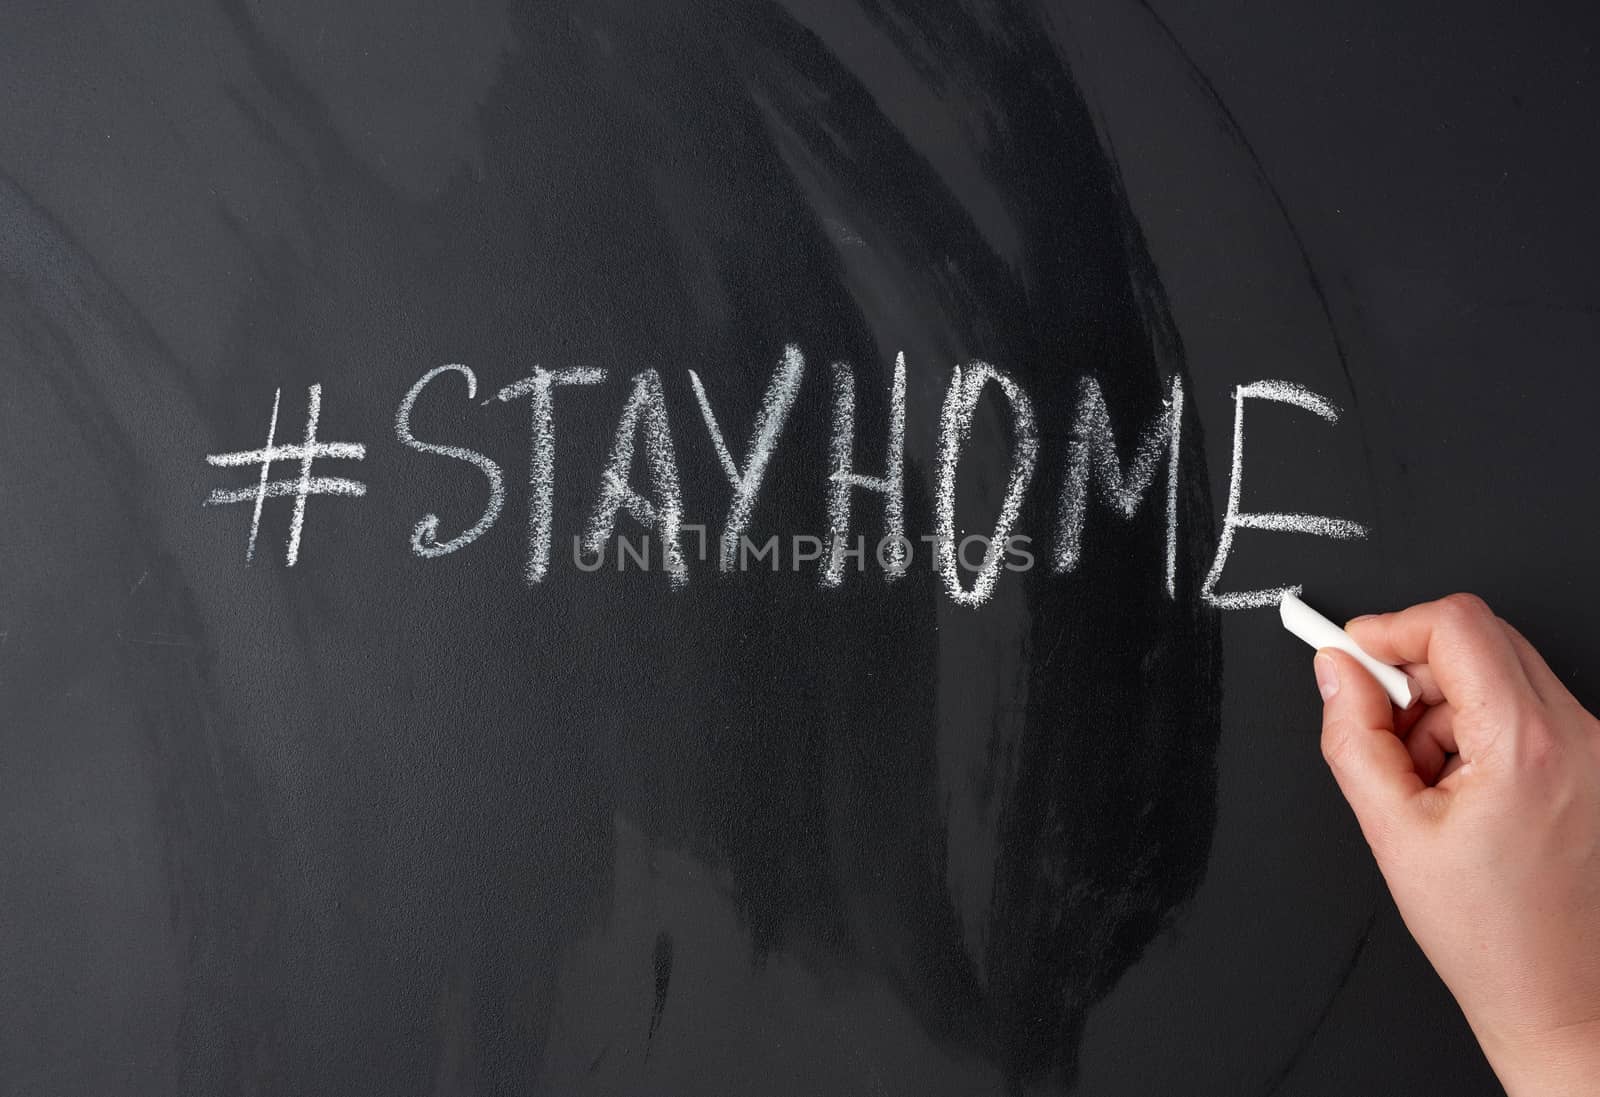 inscription stay home in chalk with a hashtag on a black chalk board, concept of self-isolation in an epidemic and pandemic